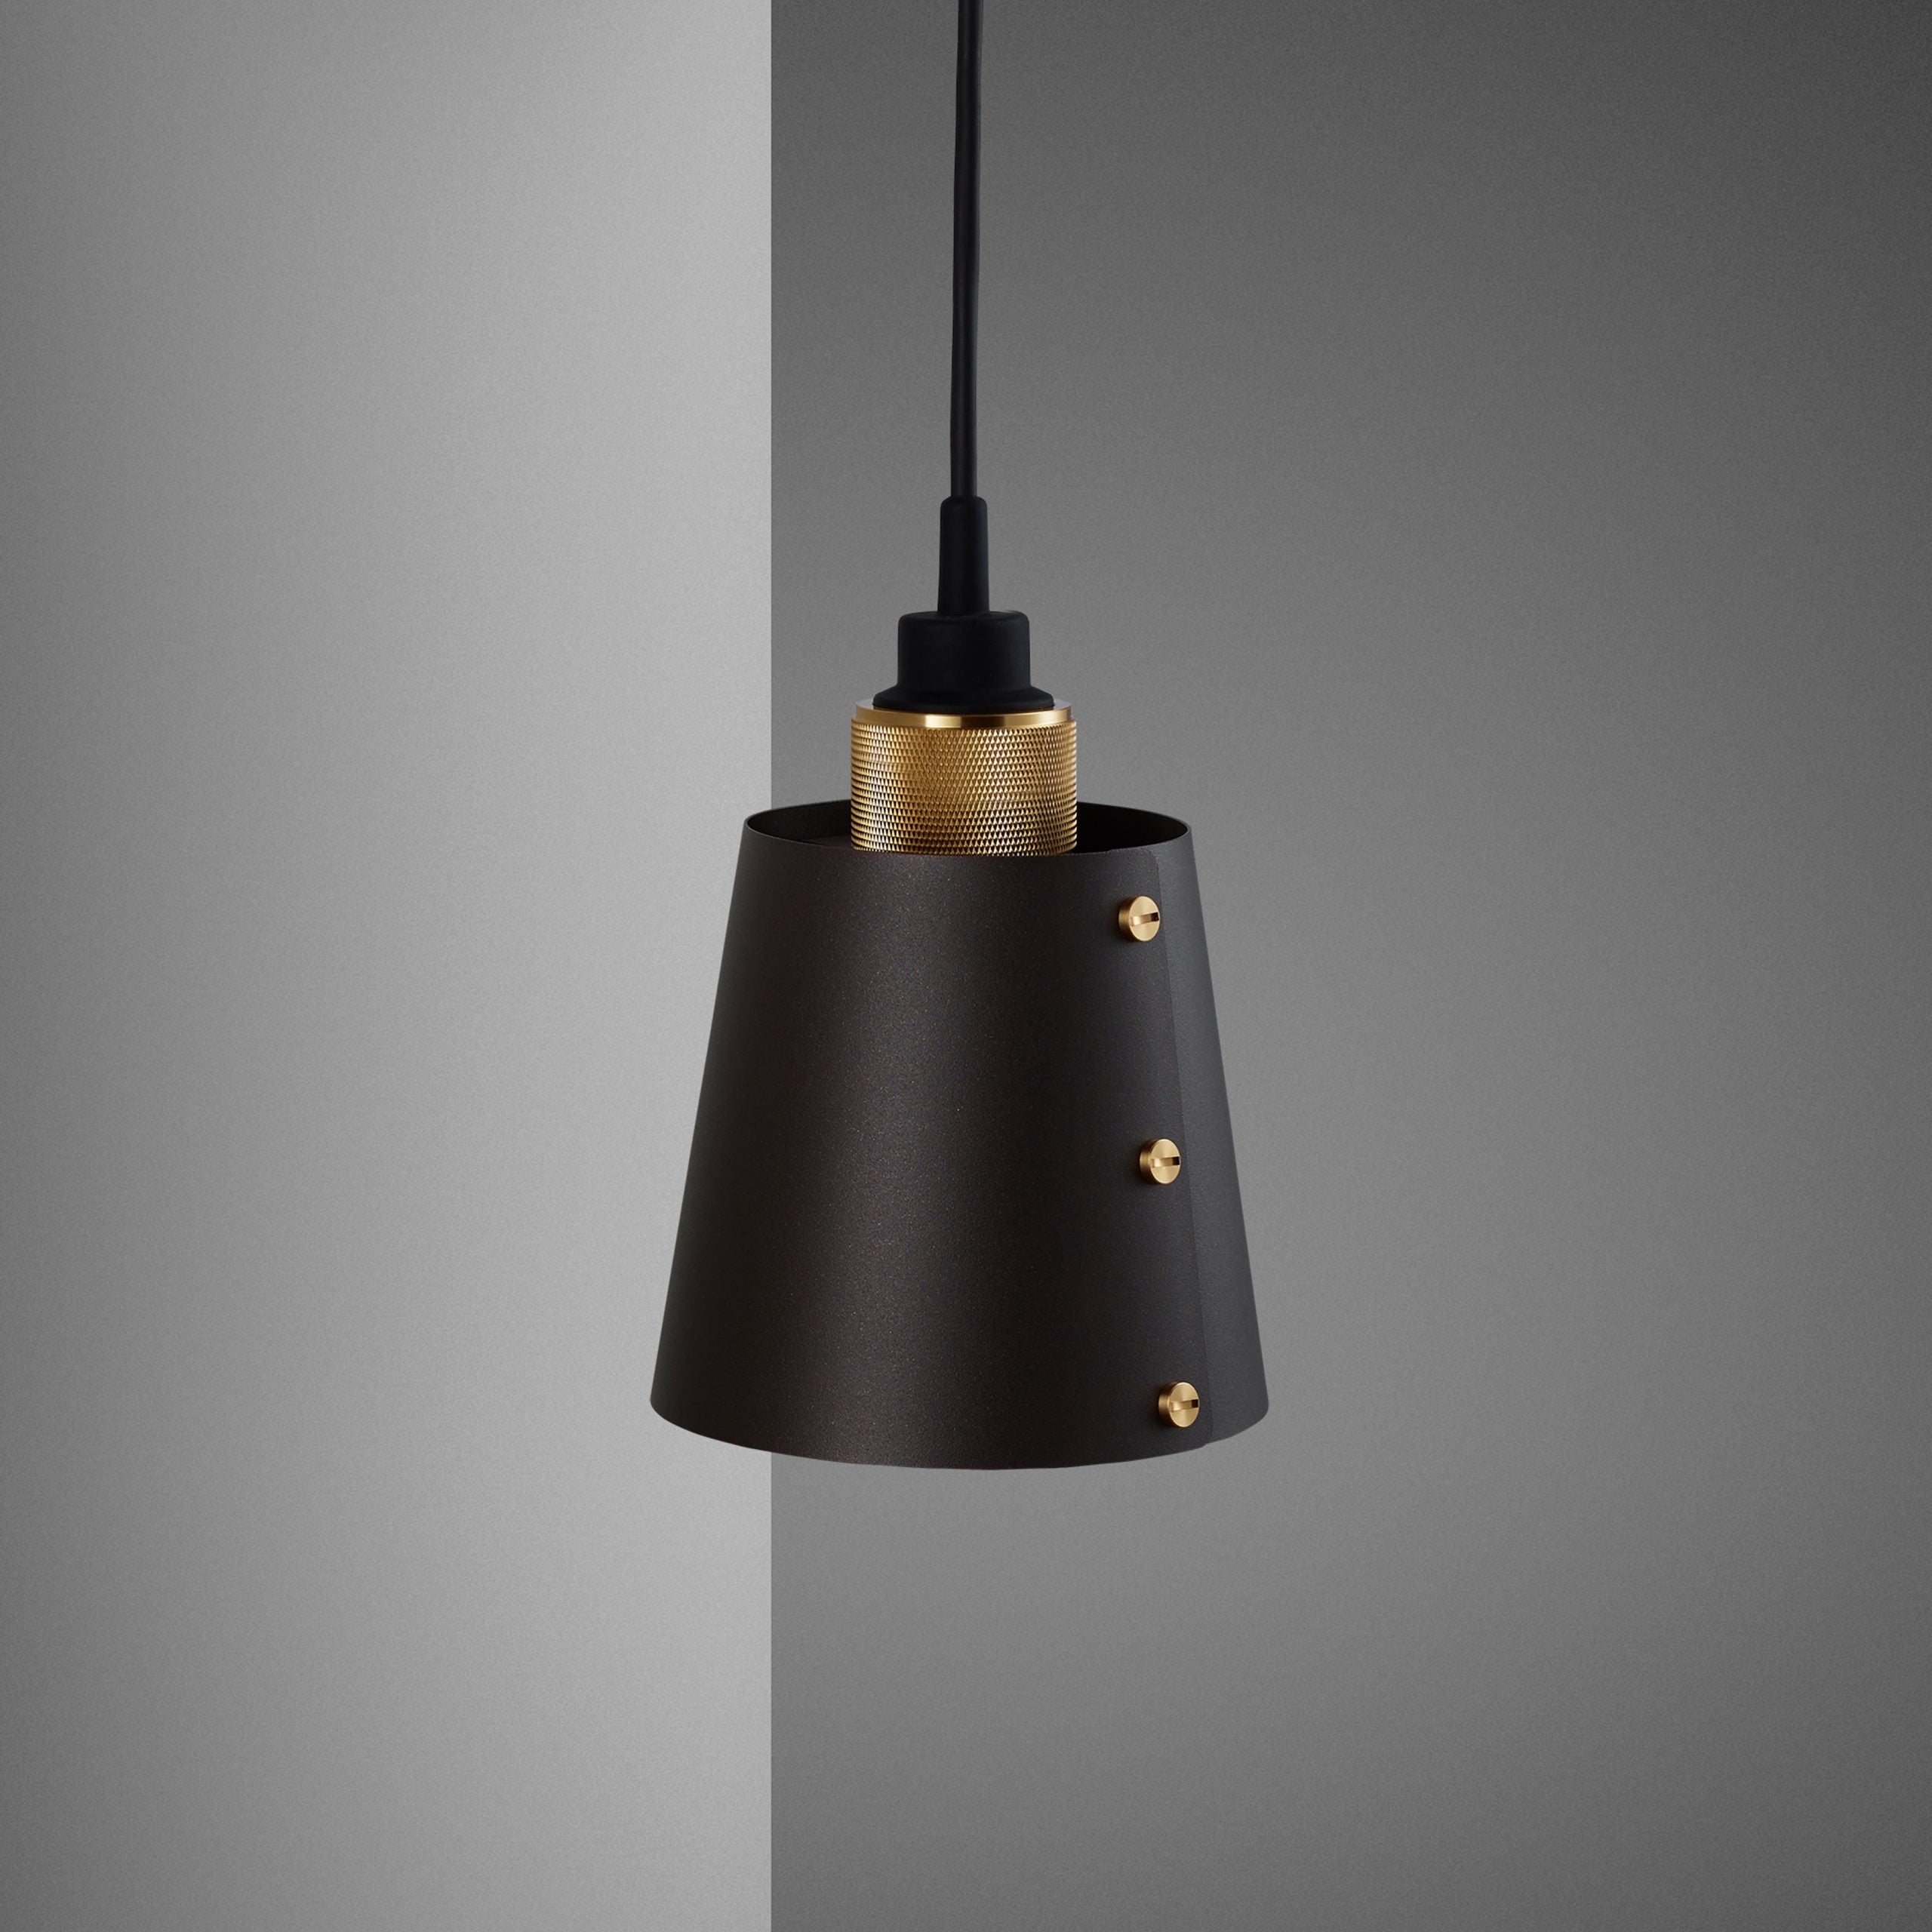 Buster + Punch Hooked Wall Sconce Wall Light Fixtures Buster + Punch Graphite/Brass & Graphite Shade Small 